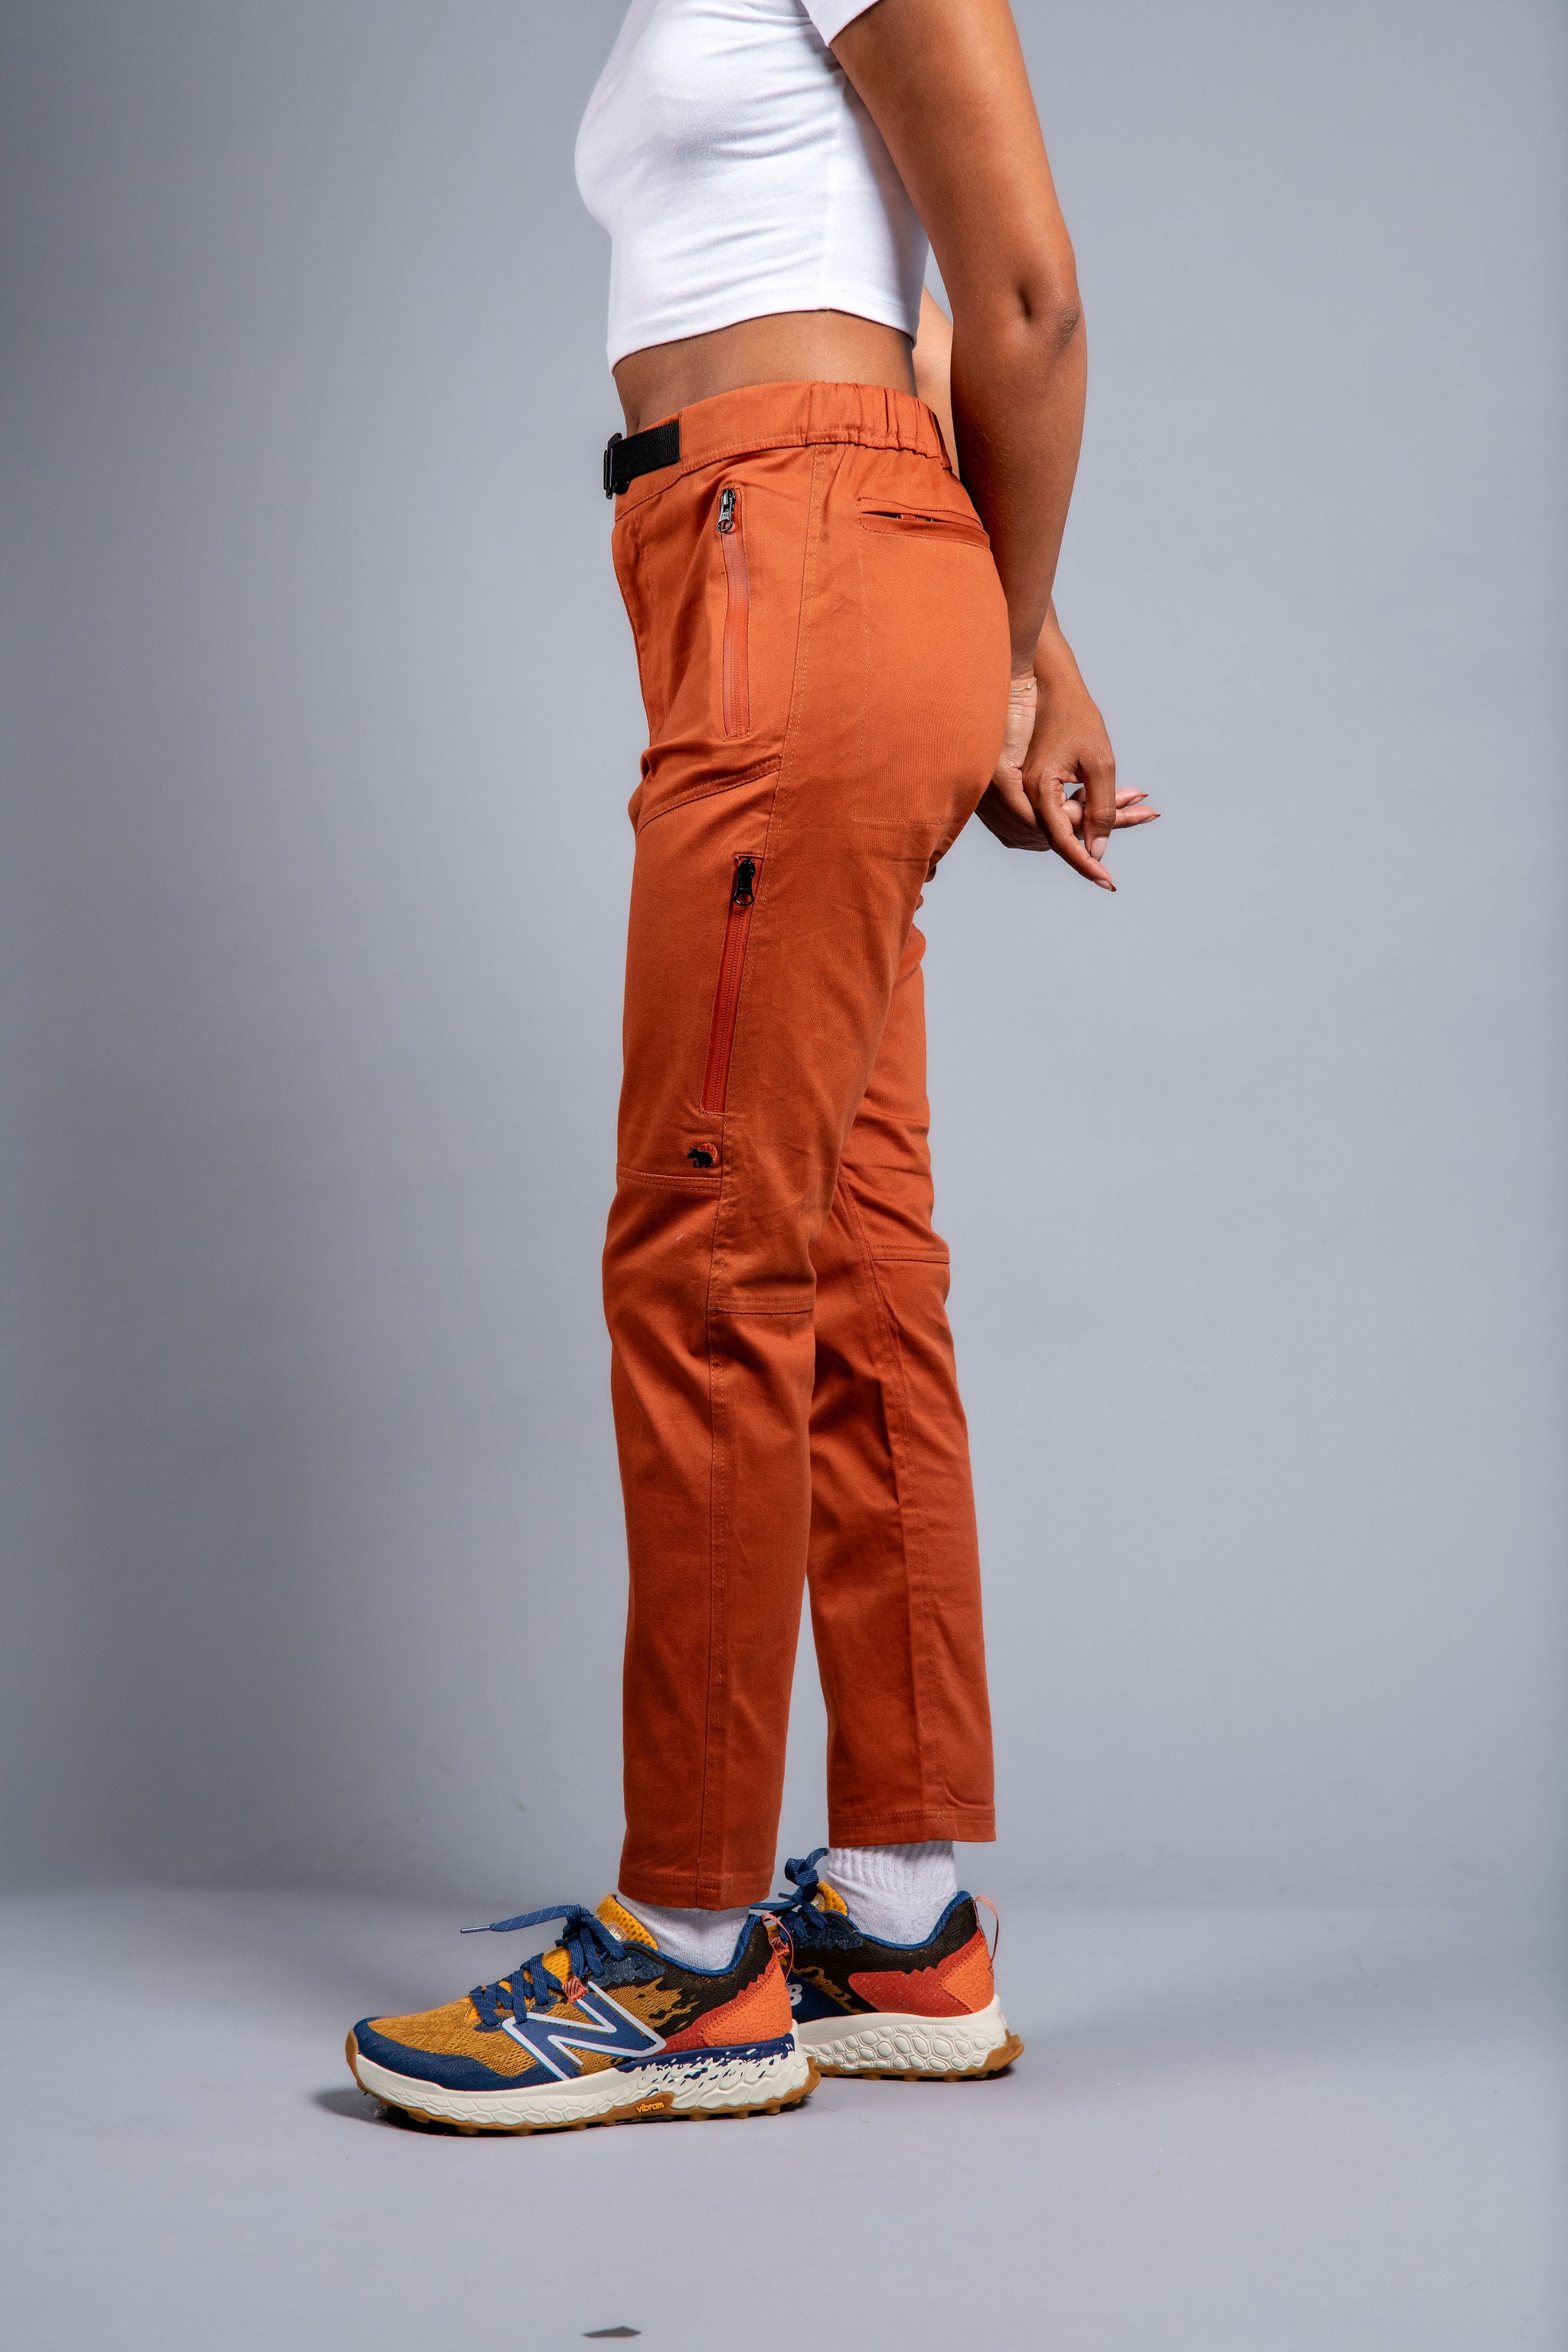 woman in adjustable orange hiking pants and tee shirt #color_red rocks